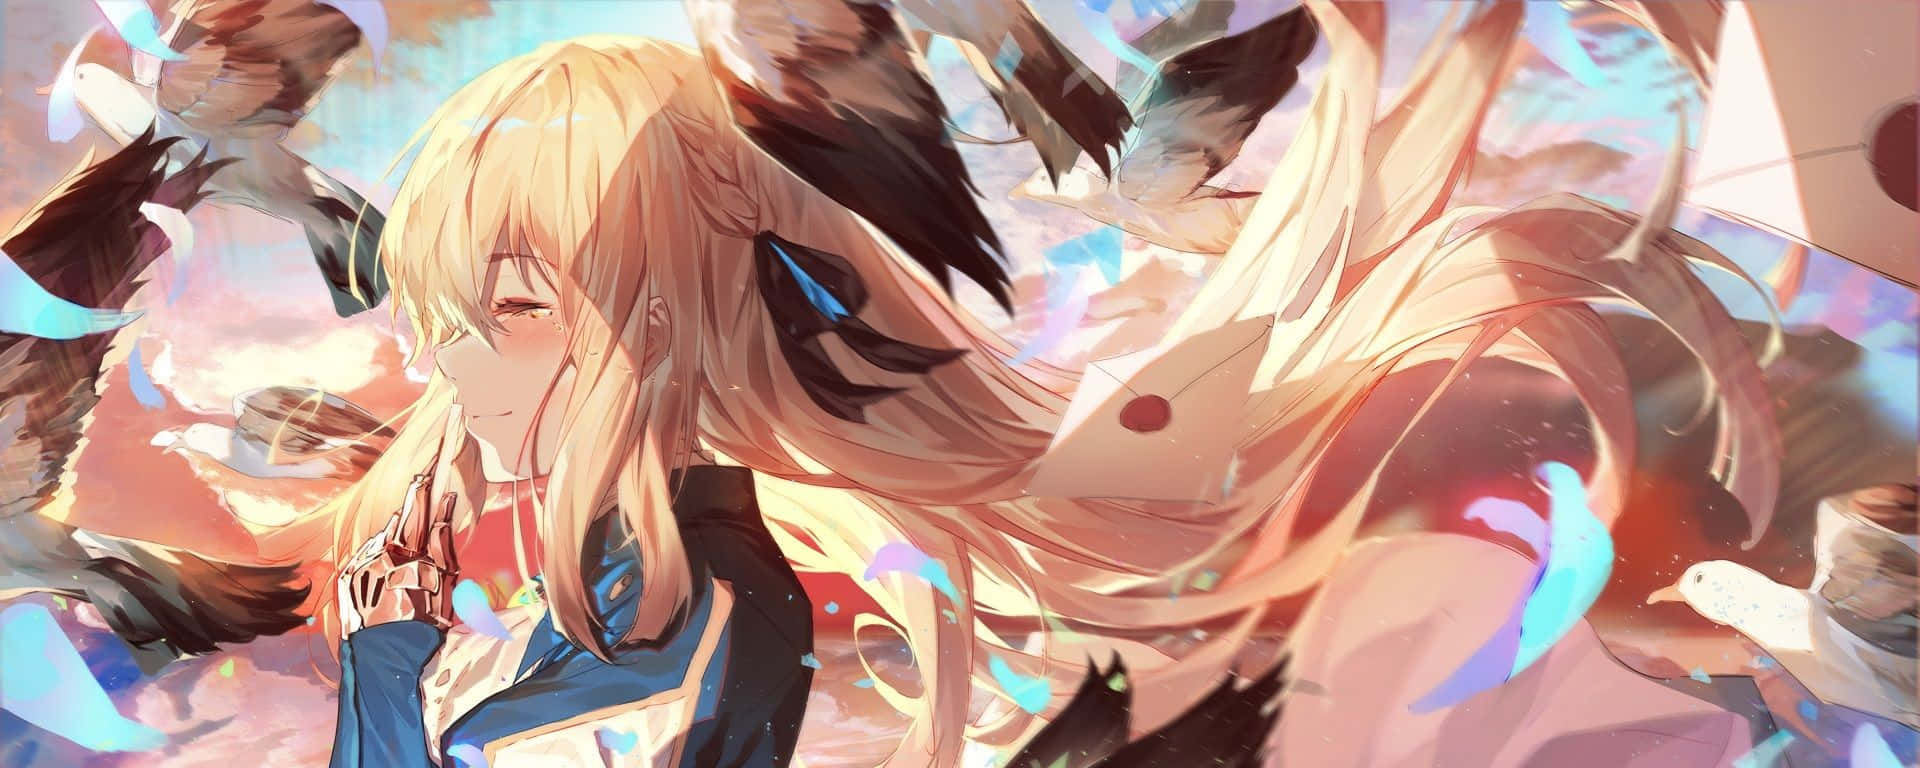 Violet Evergarden, a life-changing journey